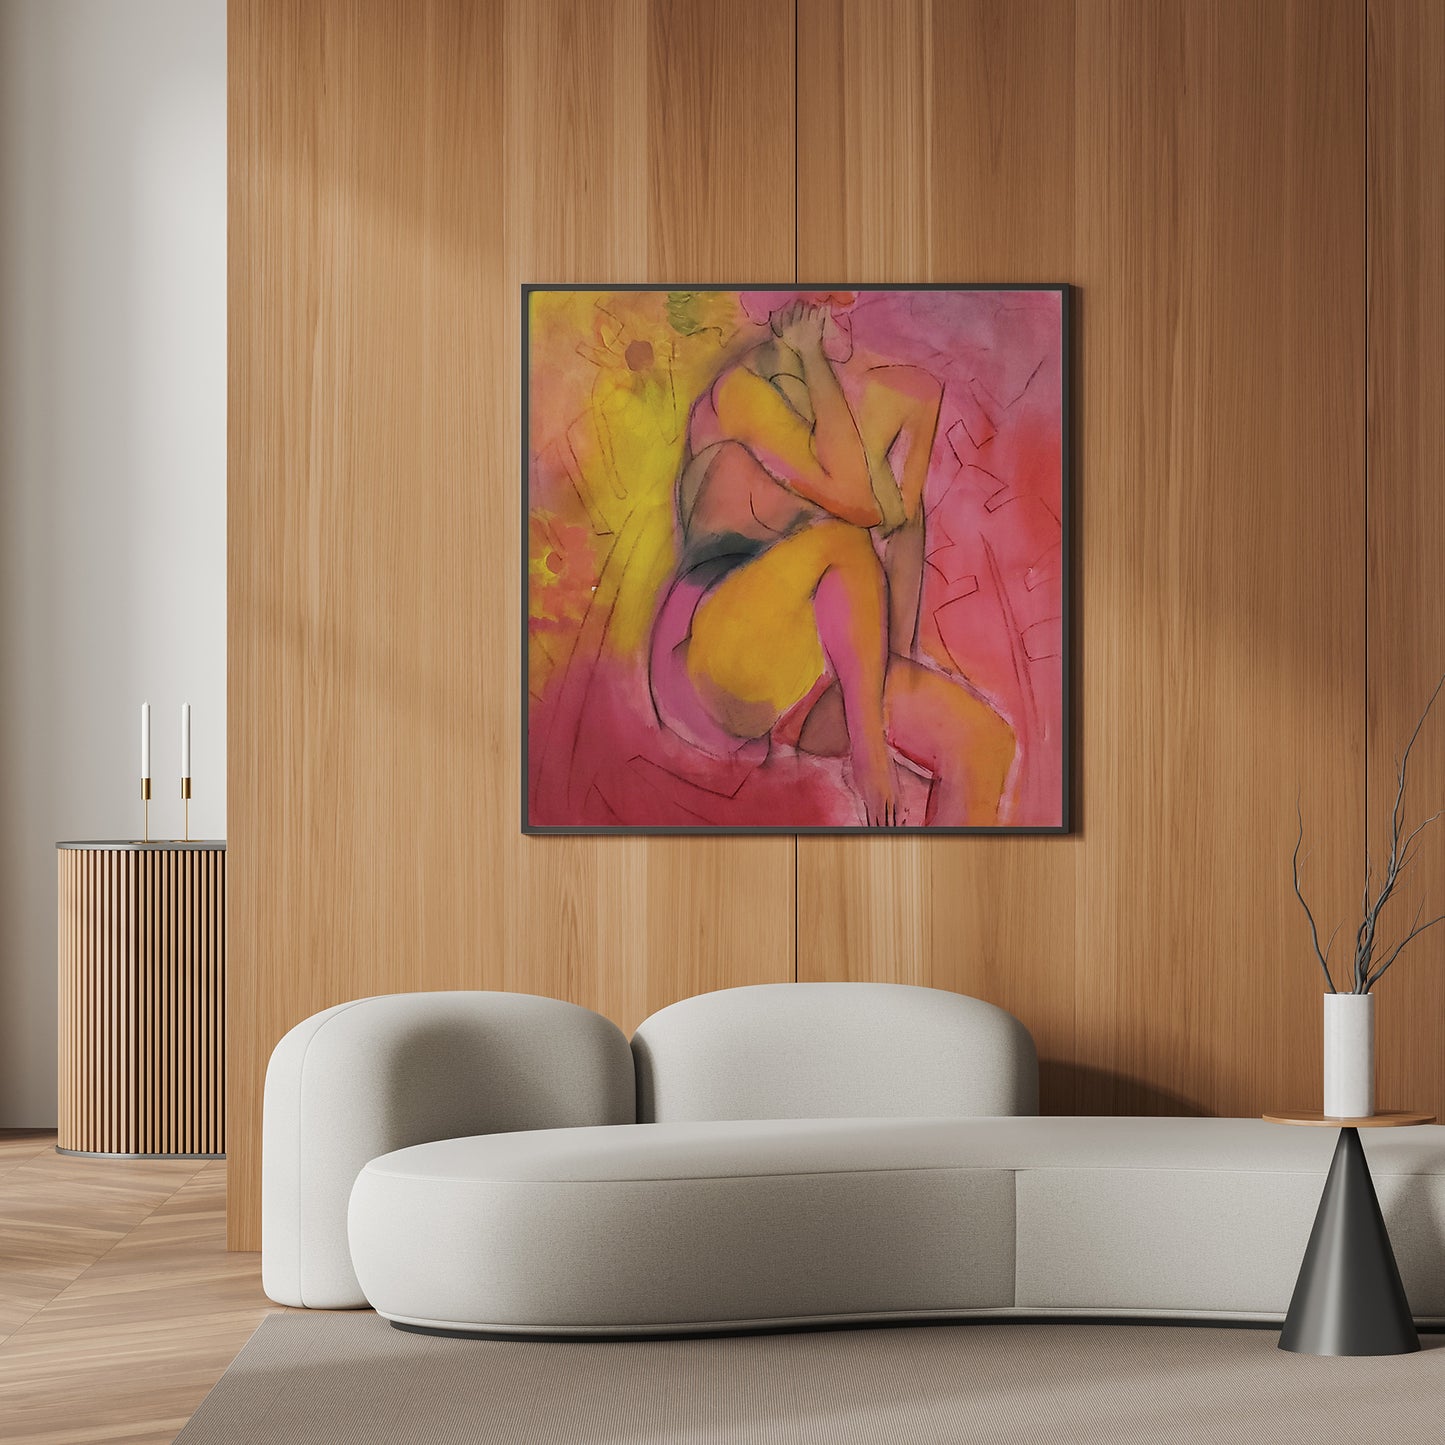 This artwork is the perfect addition to your home, inviting you to experience the timeless beauty and wisdom of the natural world. Let "Girl with Banana Leaves" transport you to a realm where thoughts merge with nature, where introspection meets inspiration. Allow the vibrant colors, the delicate brushstrokes, and the thought-provoking imagery to ignite your imagination and connection with the world around you.